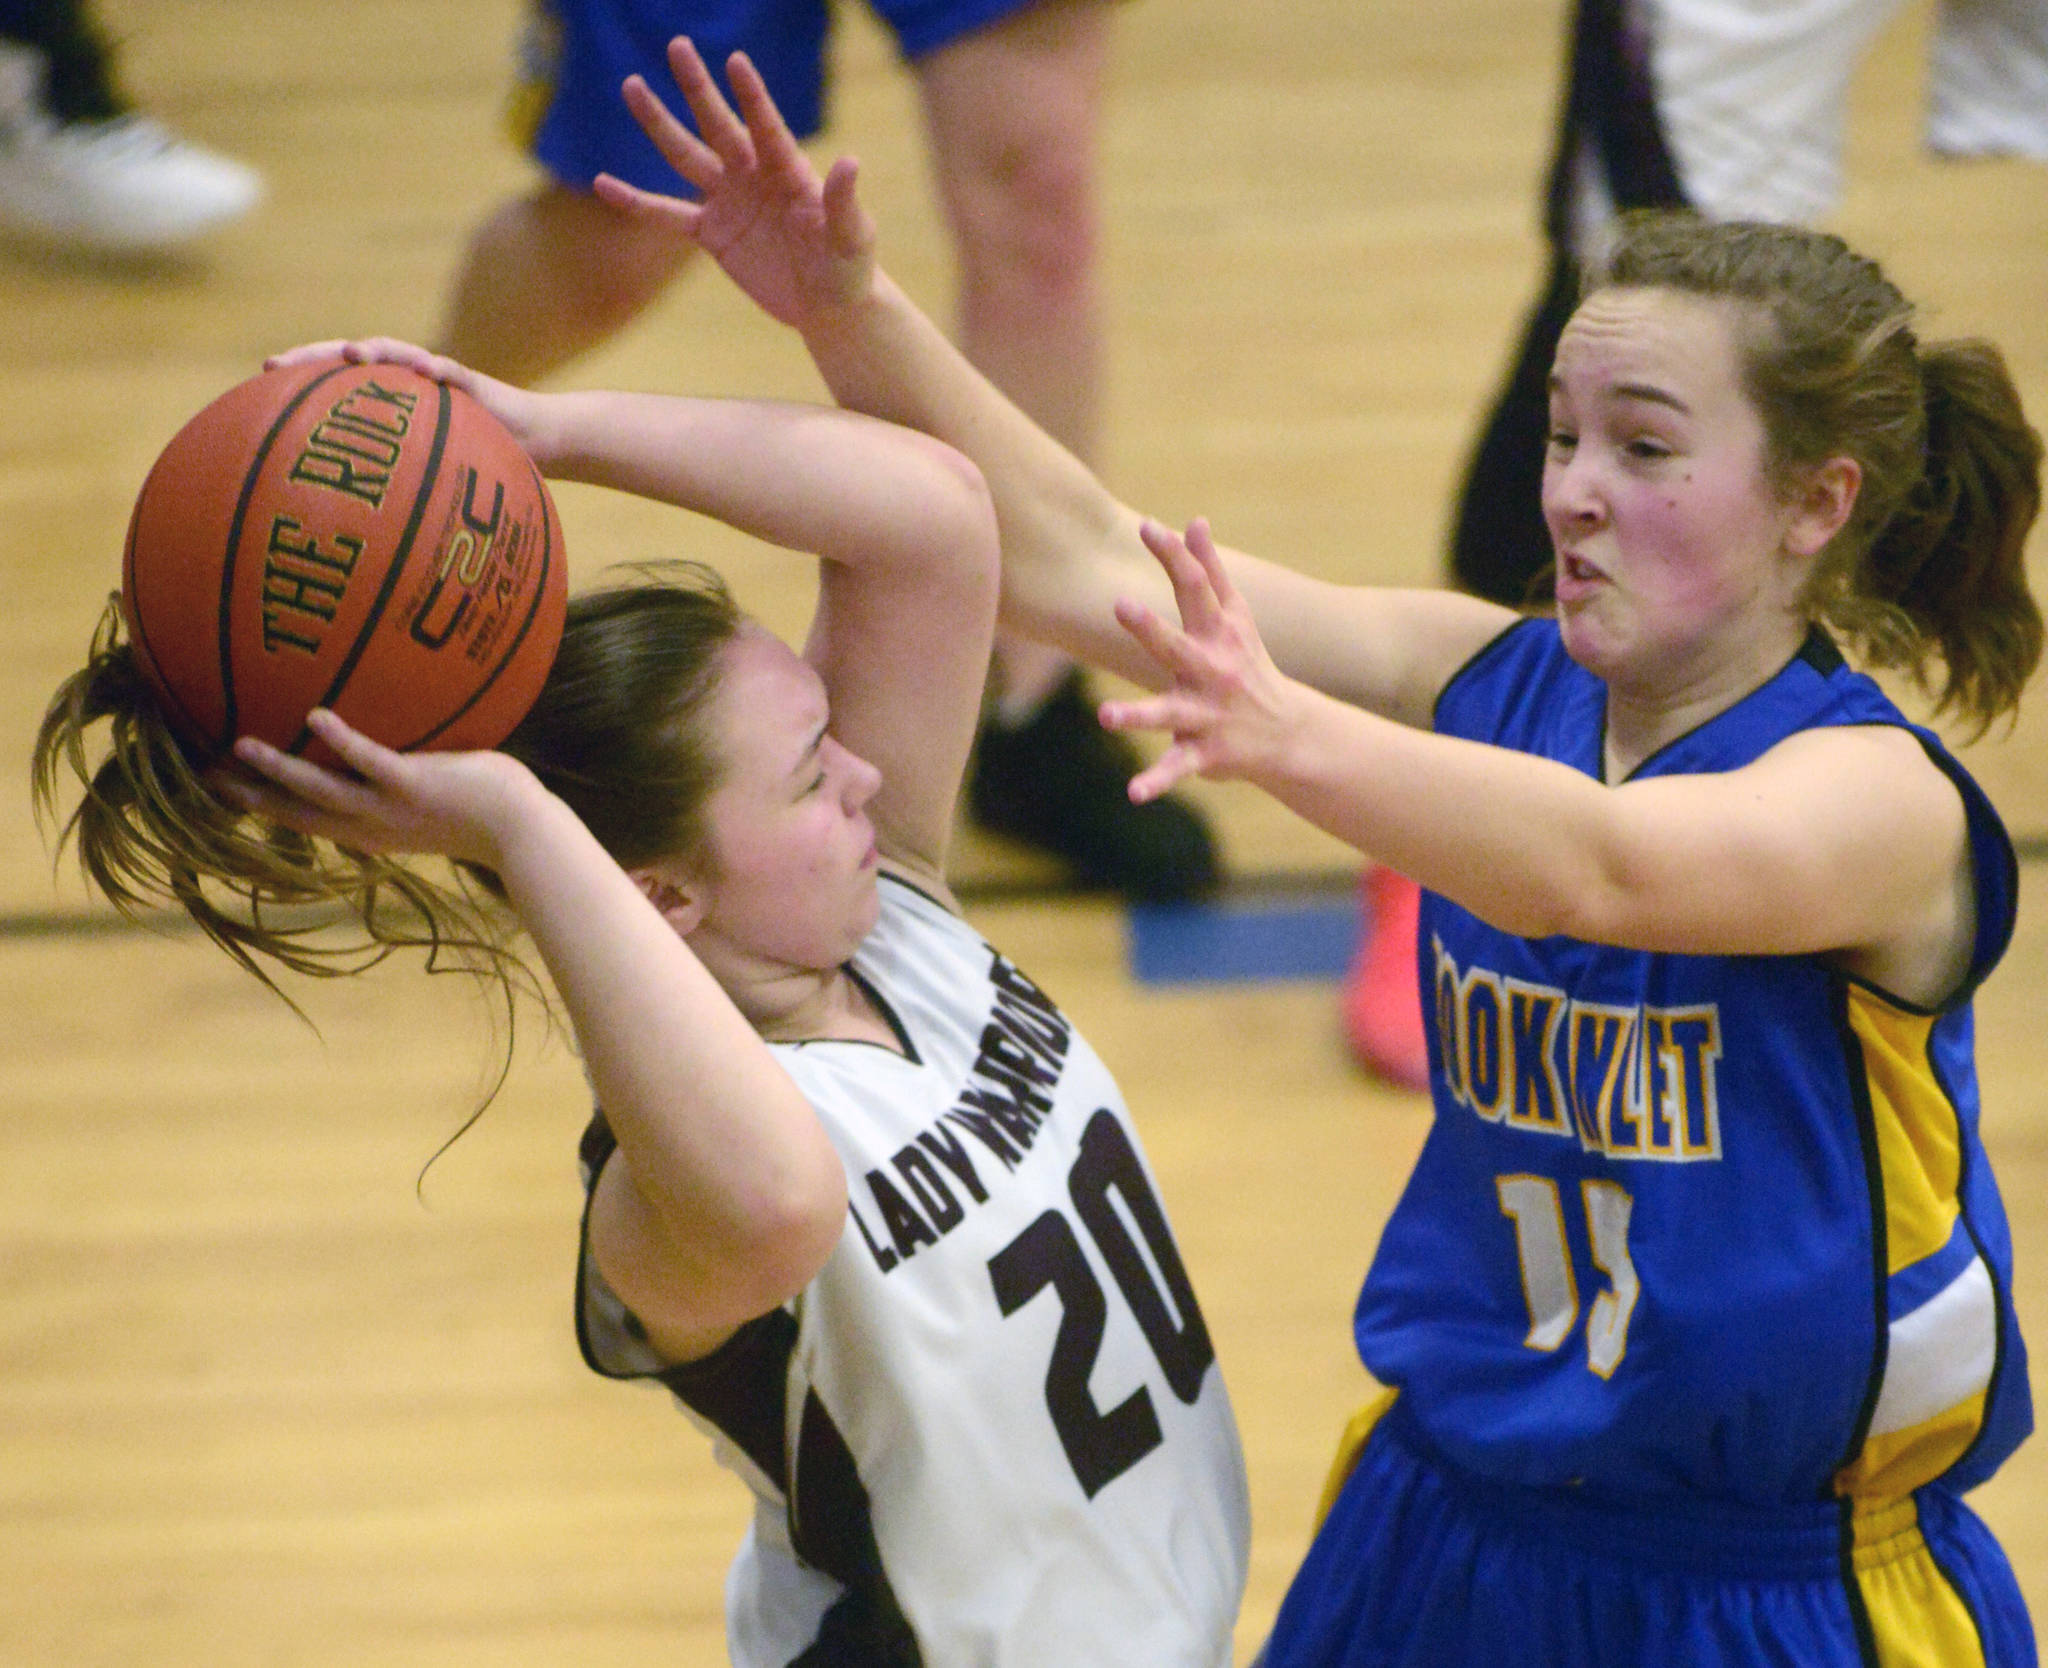 Cook Inlet Academy’s Addie Nelson pressures Nikolaevsk’s Krystyana Kalugin on Friday, March 1, 2019, during the Peninsula Conference girls championship at Cook Inlet Academy in Soldotna. (Photo by Jeff Helminiak/Peninsula Clarion)